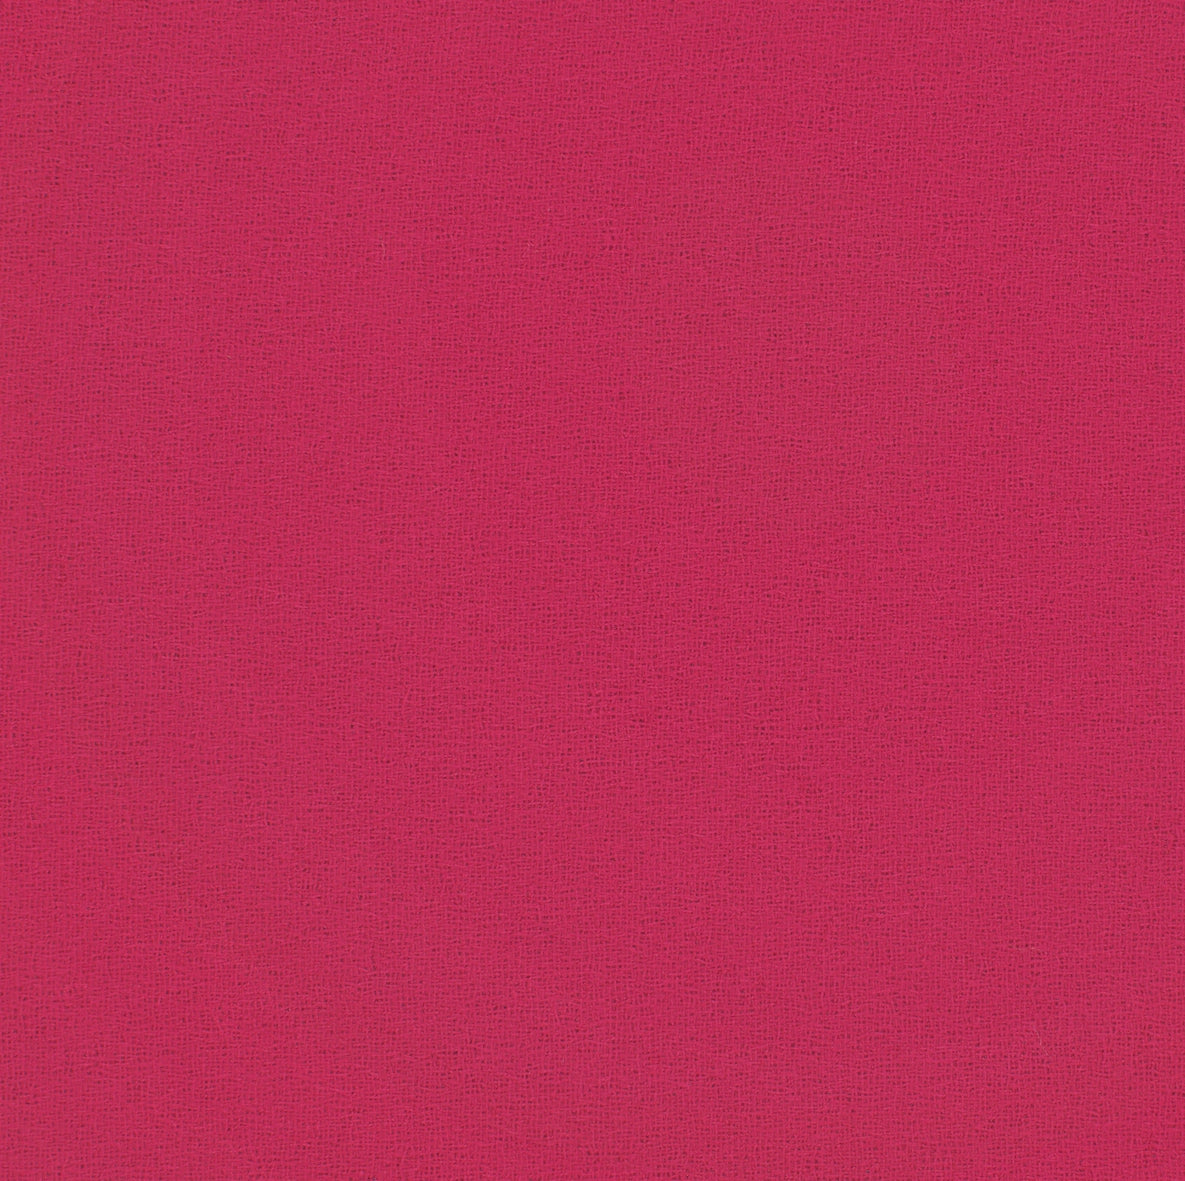 35001-10 Candy Fuchsia Crepe Plain Dyed Blend 315g/yd 54" crepe plain dyed polyester red woven Solid Color - knit fabric - woven fabric - fabric company - fabric wholesale - fabric b2b - fabric factory - high quality fabric - hong kong fabric - fabric hk - acetate fabric - cotton fabric - linen fabric - metallic fabric - nylon fabric - polyester fabric - spandex fabric - chun wing hing - cwh hk - fabric worldwide ship - 針織布 - 梳織布 - 布料公司- 布料批發 - 香港布料 - 秦榮興